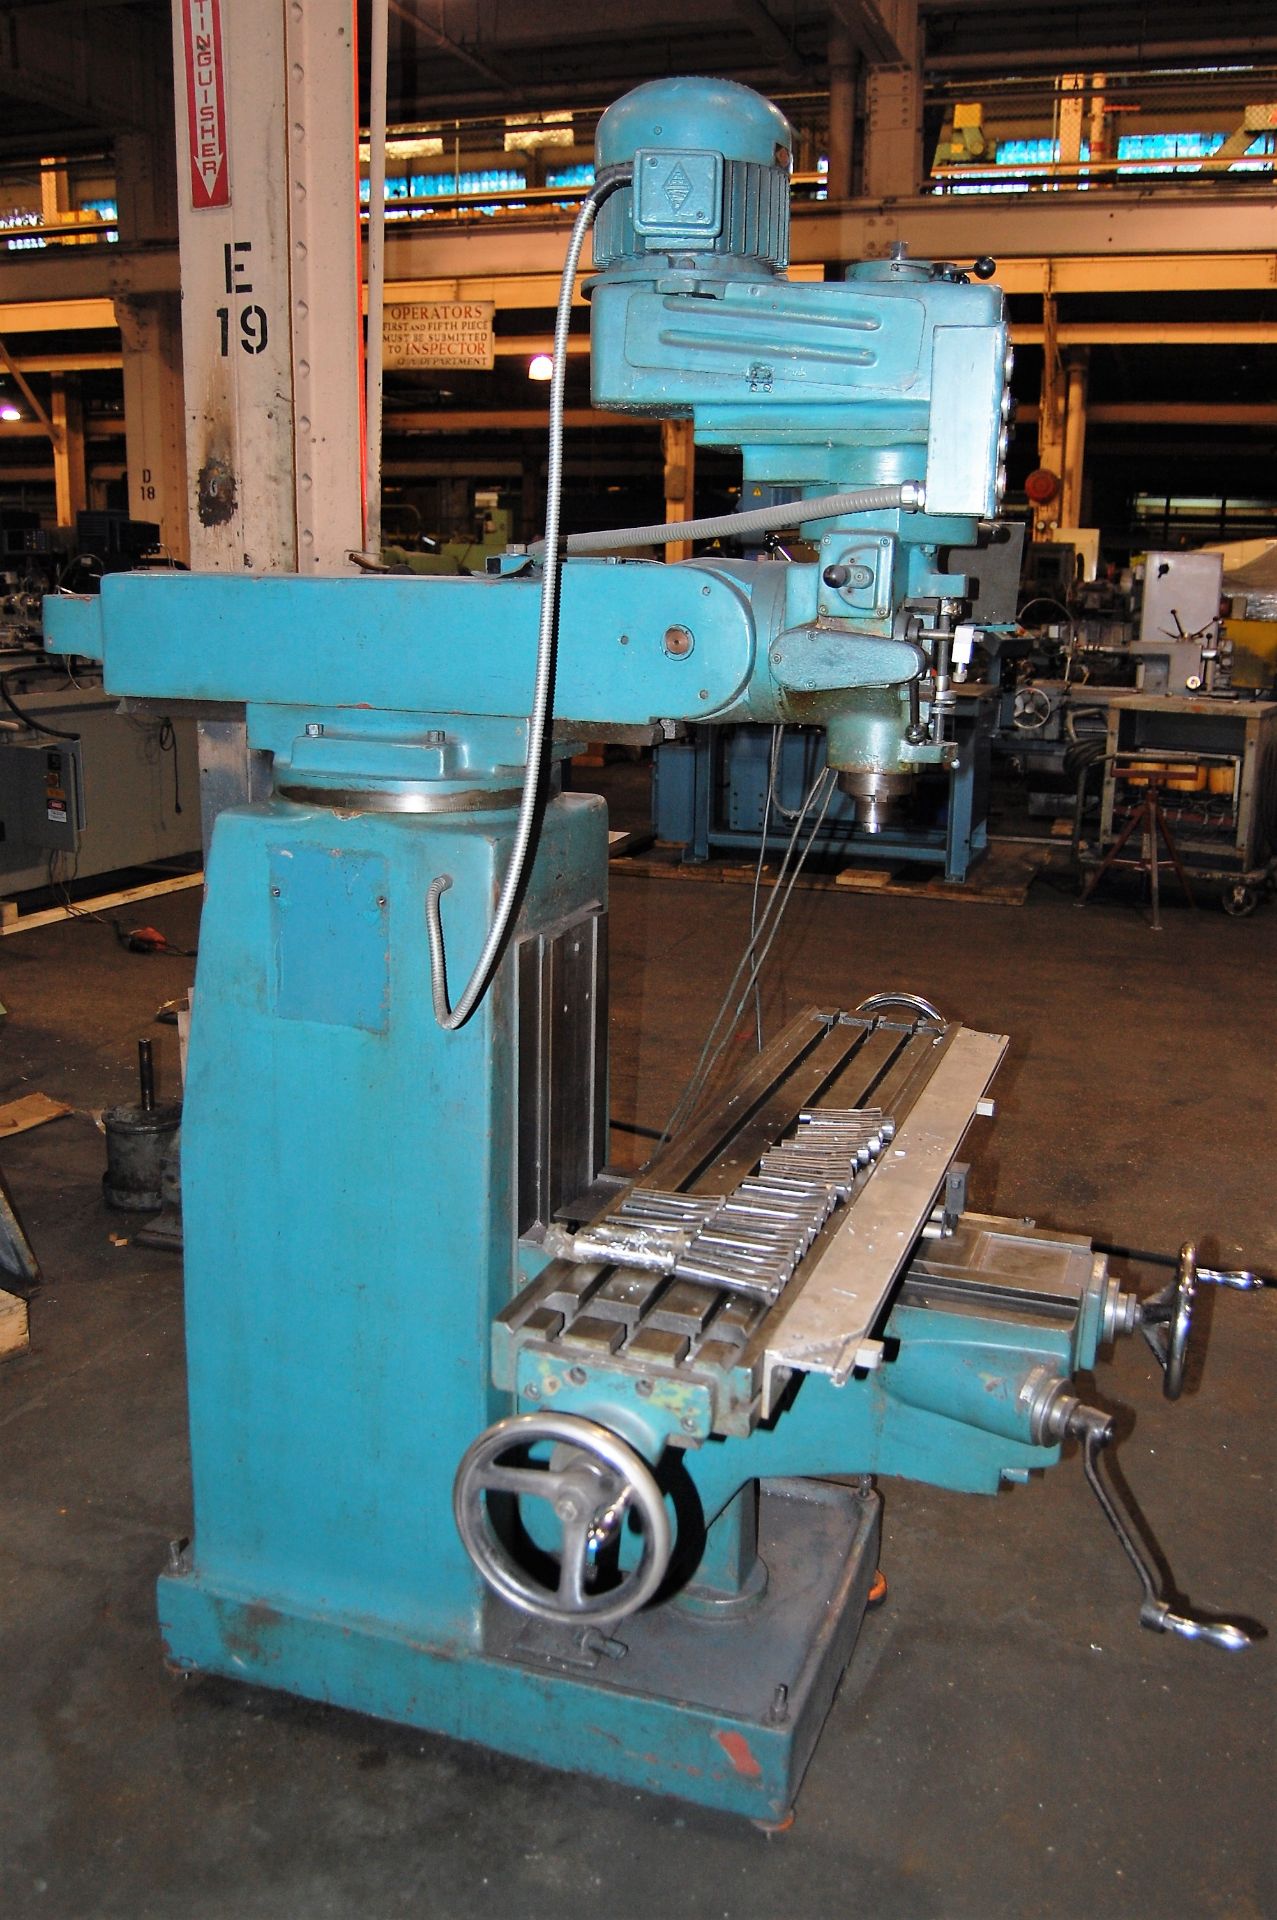 EDESTAAL 1.5HP VERTICAL MILL KNEE-TYPE MILL, R8 SPINDLE, 16-SPINDLE SPEEDS, 67-4600 RPM, 10" X 48" - Image 12 of 13